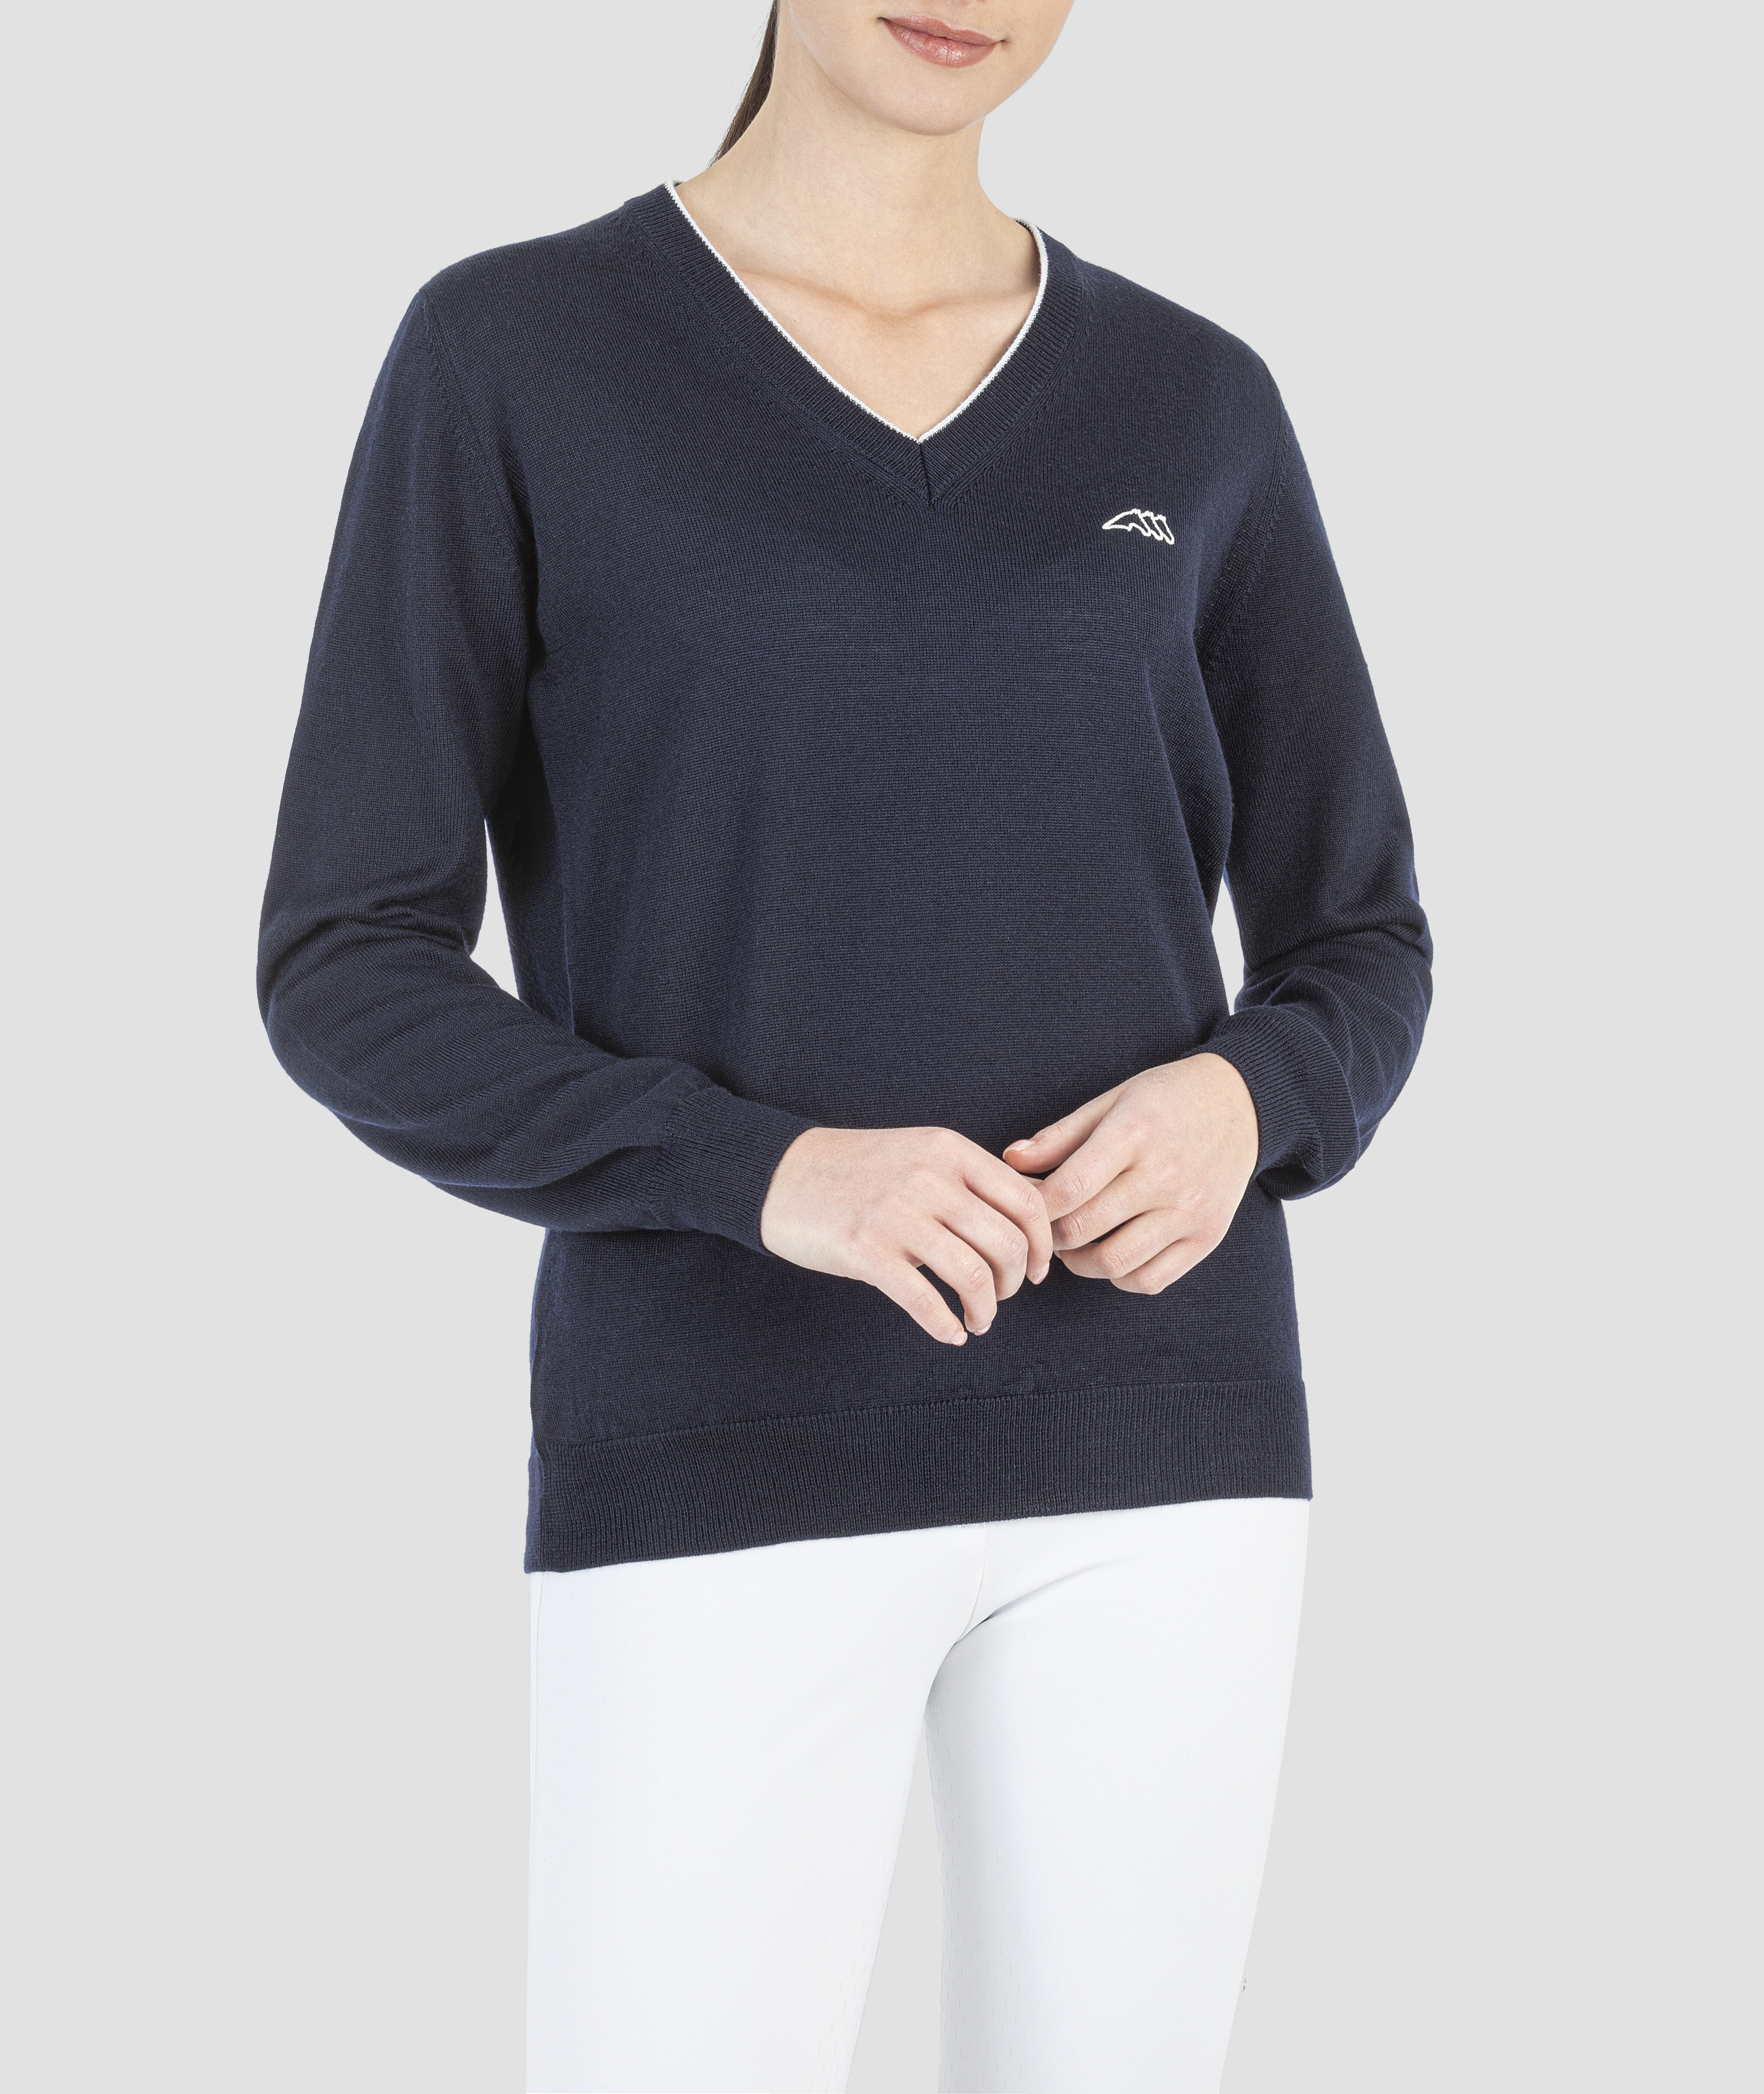 Ceklic Ladies Knitted Pullover - Navy